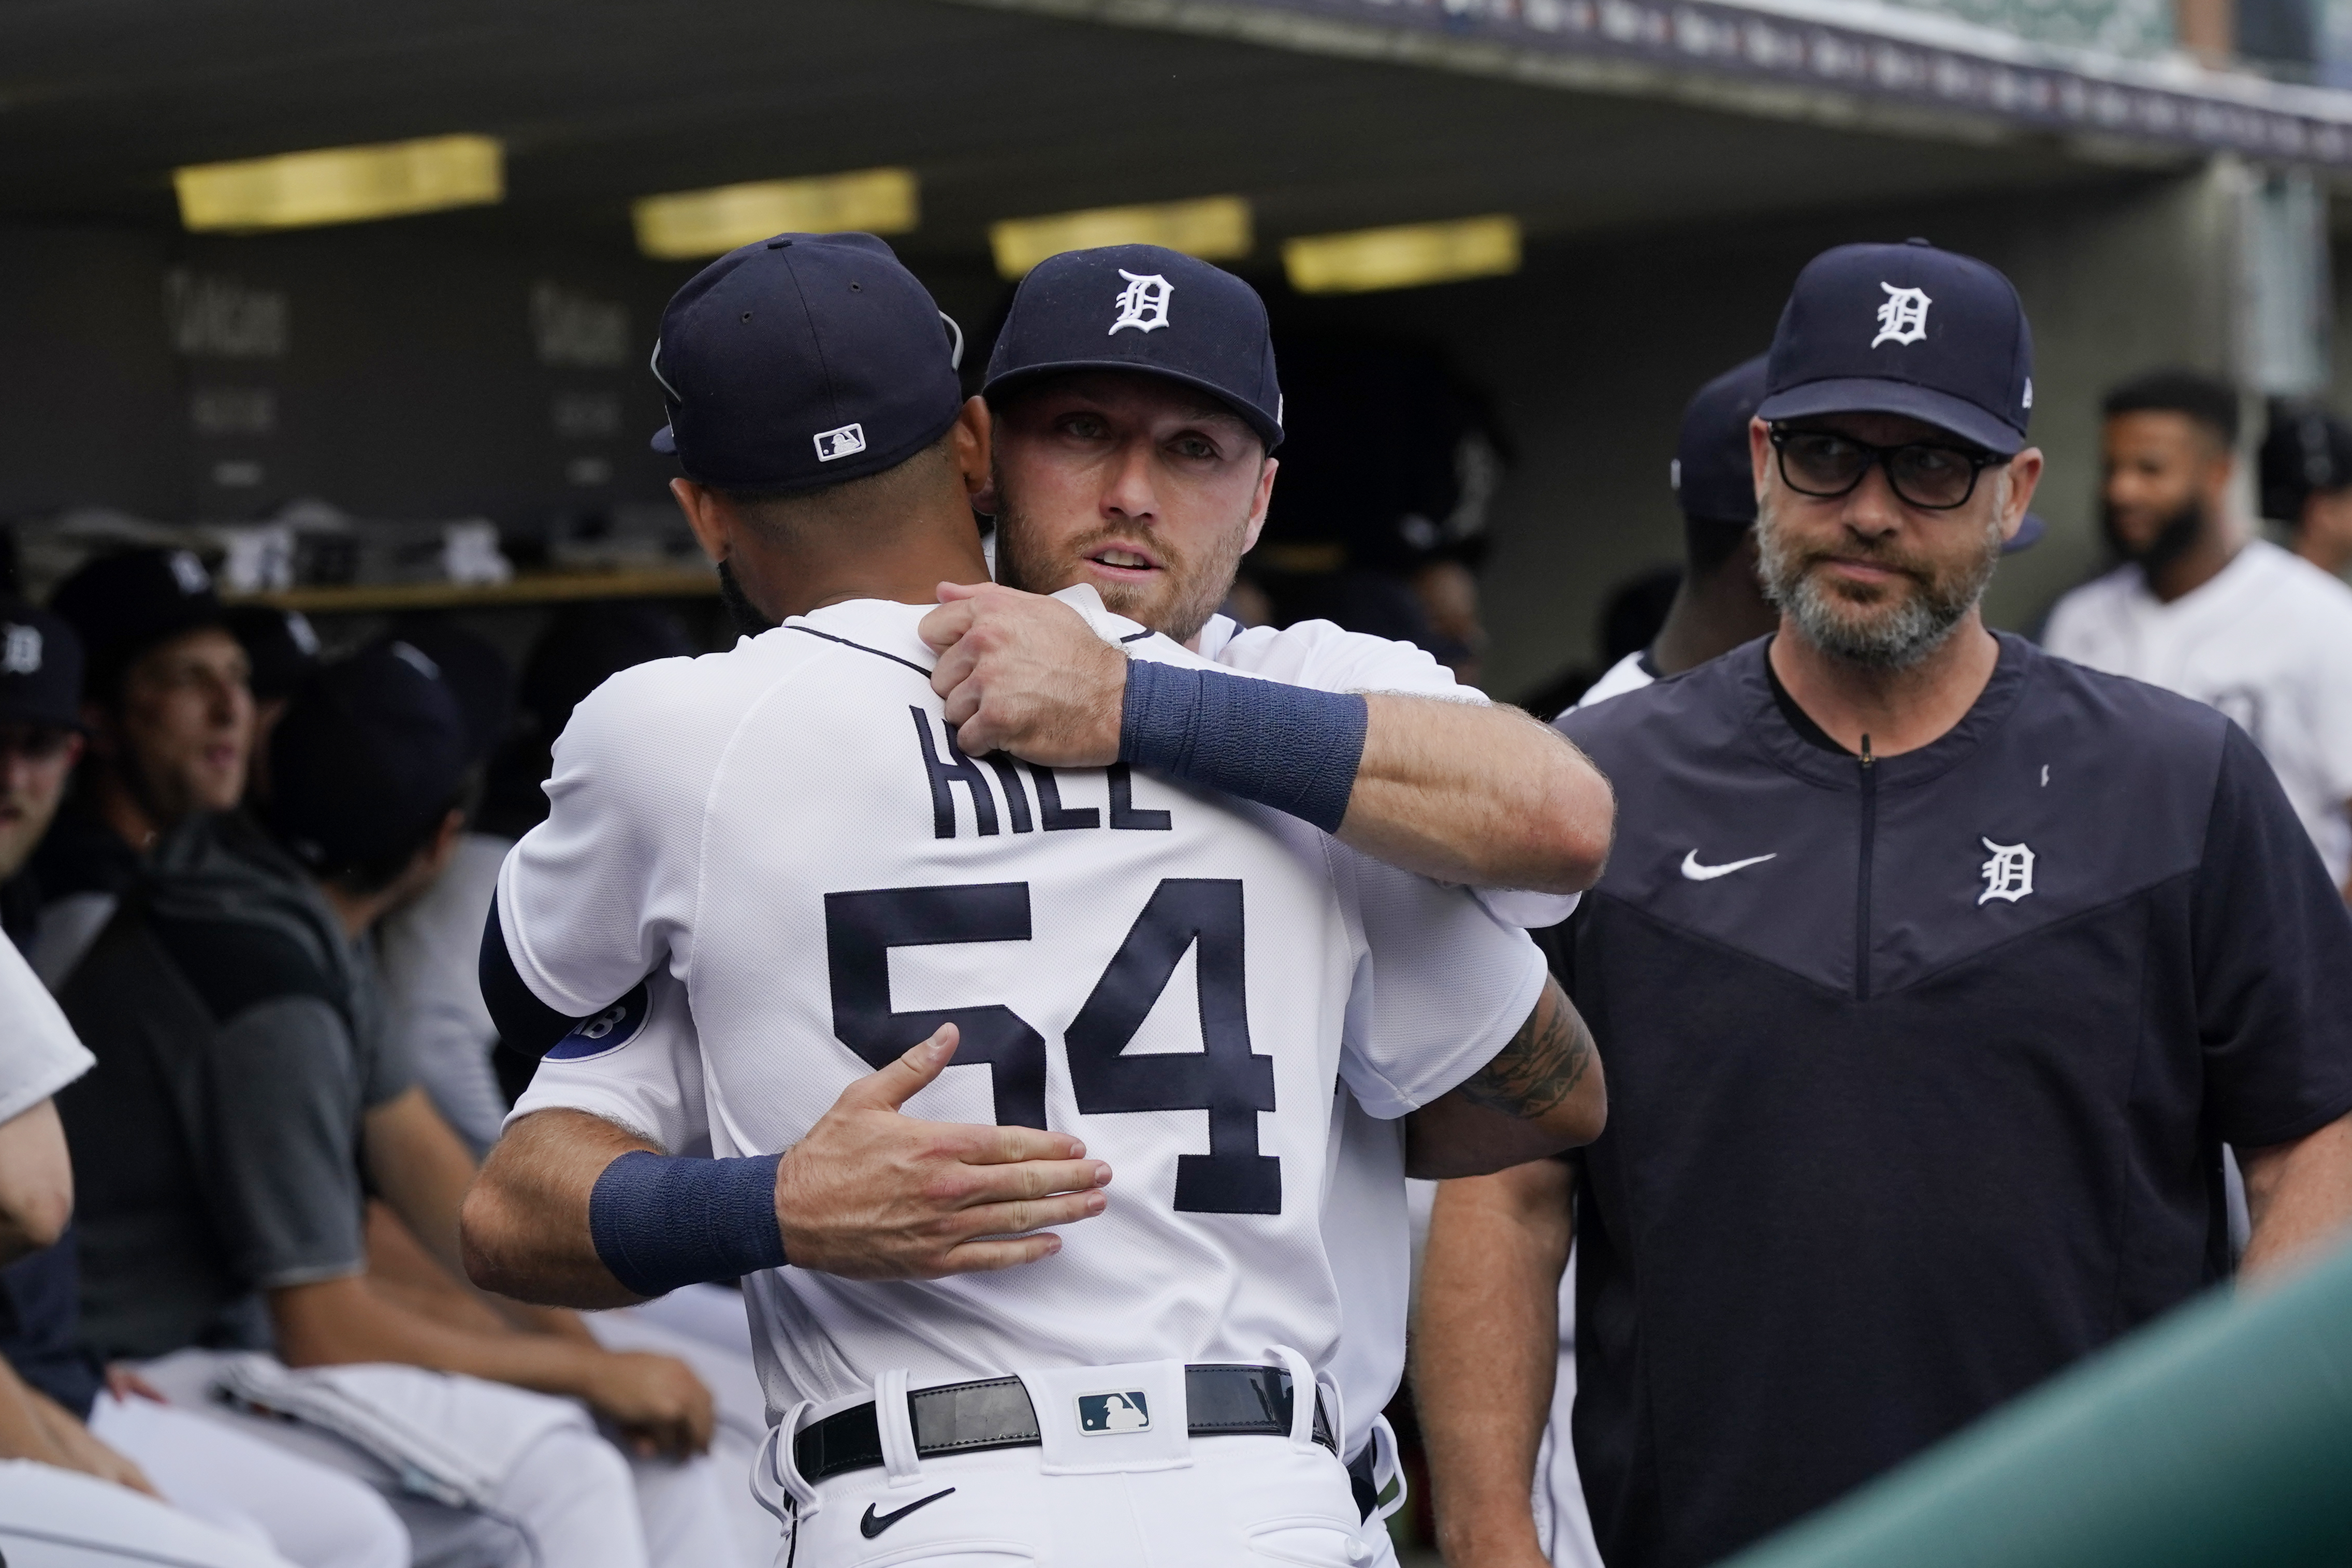 Famous dad watches as Tigers' Kody Clemens makes MLB debut - The